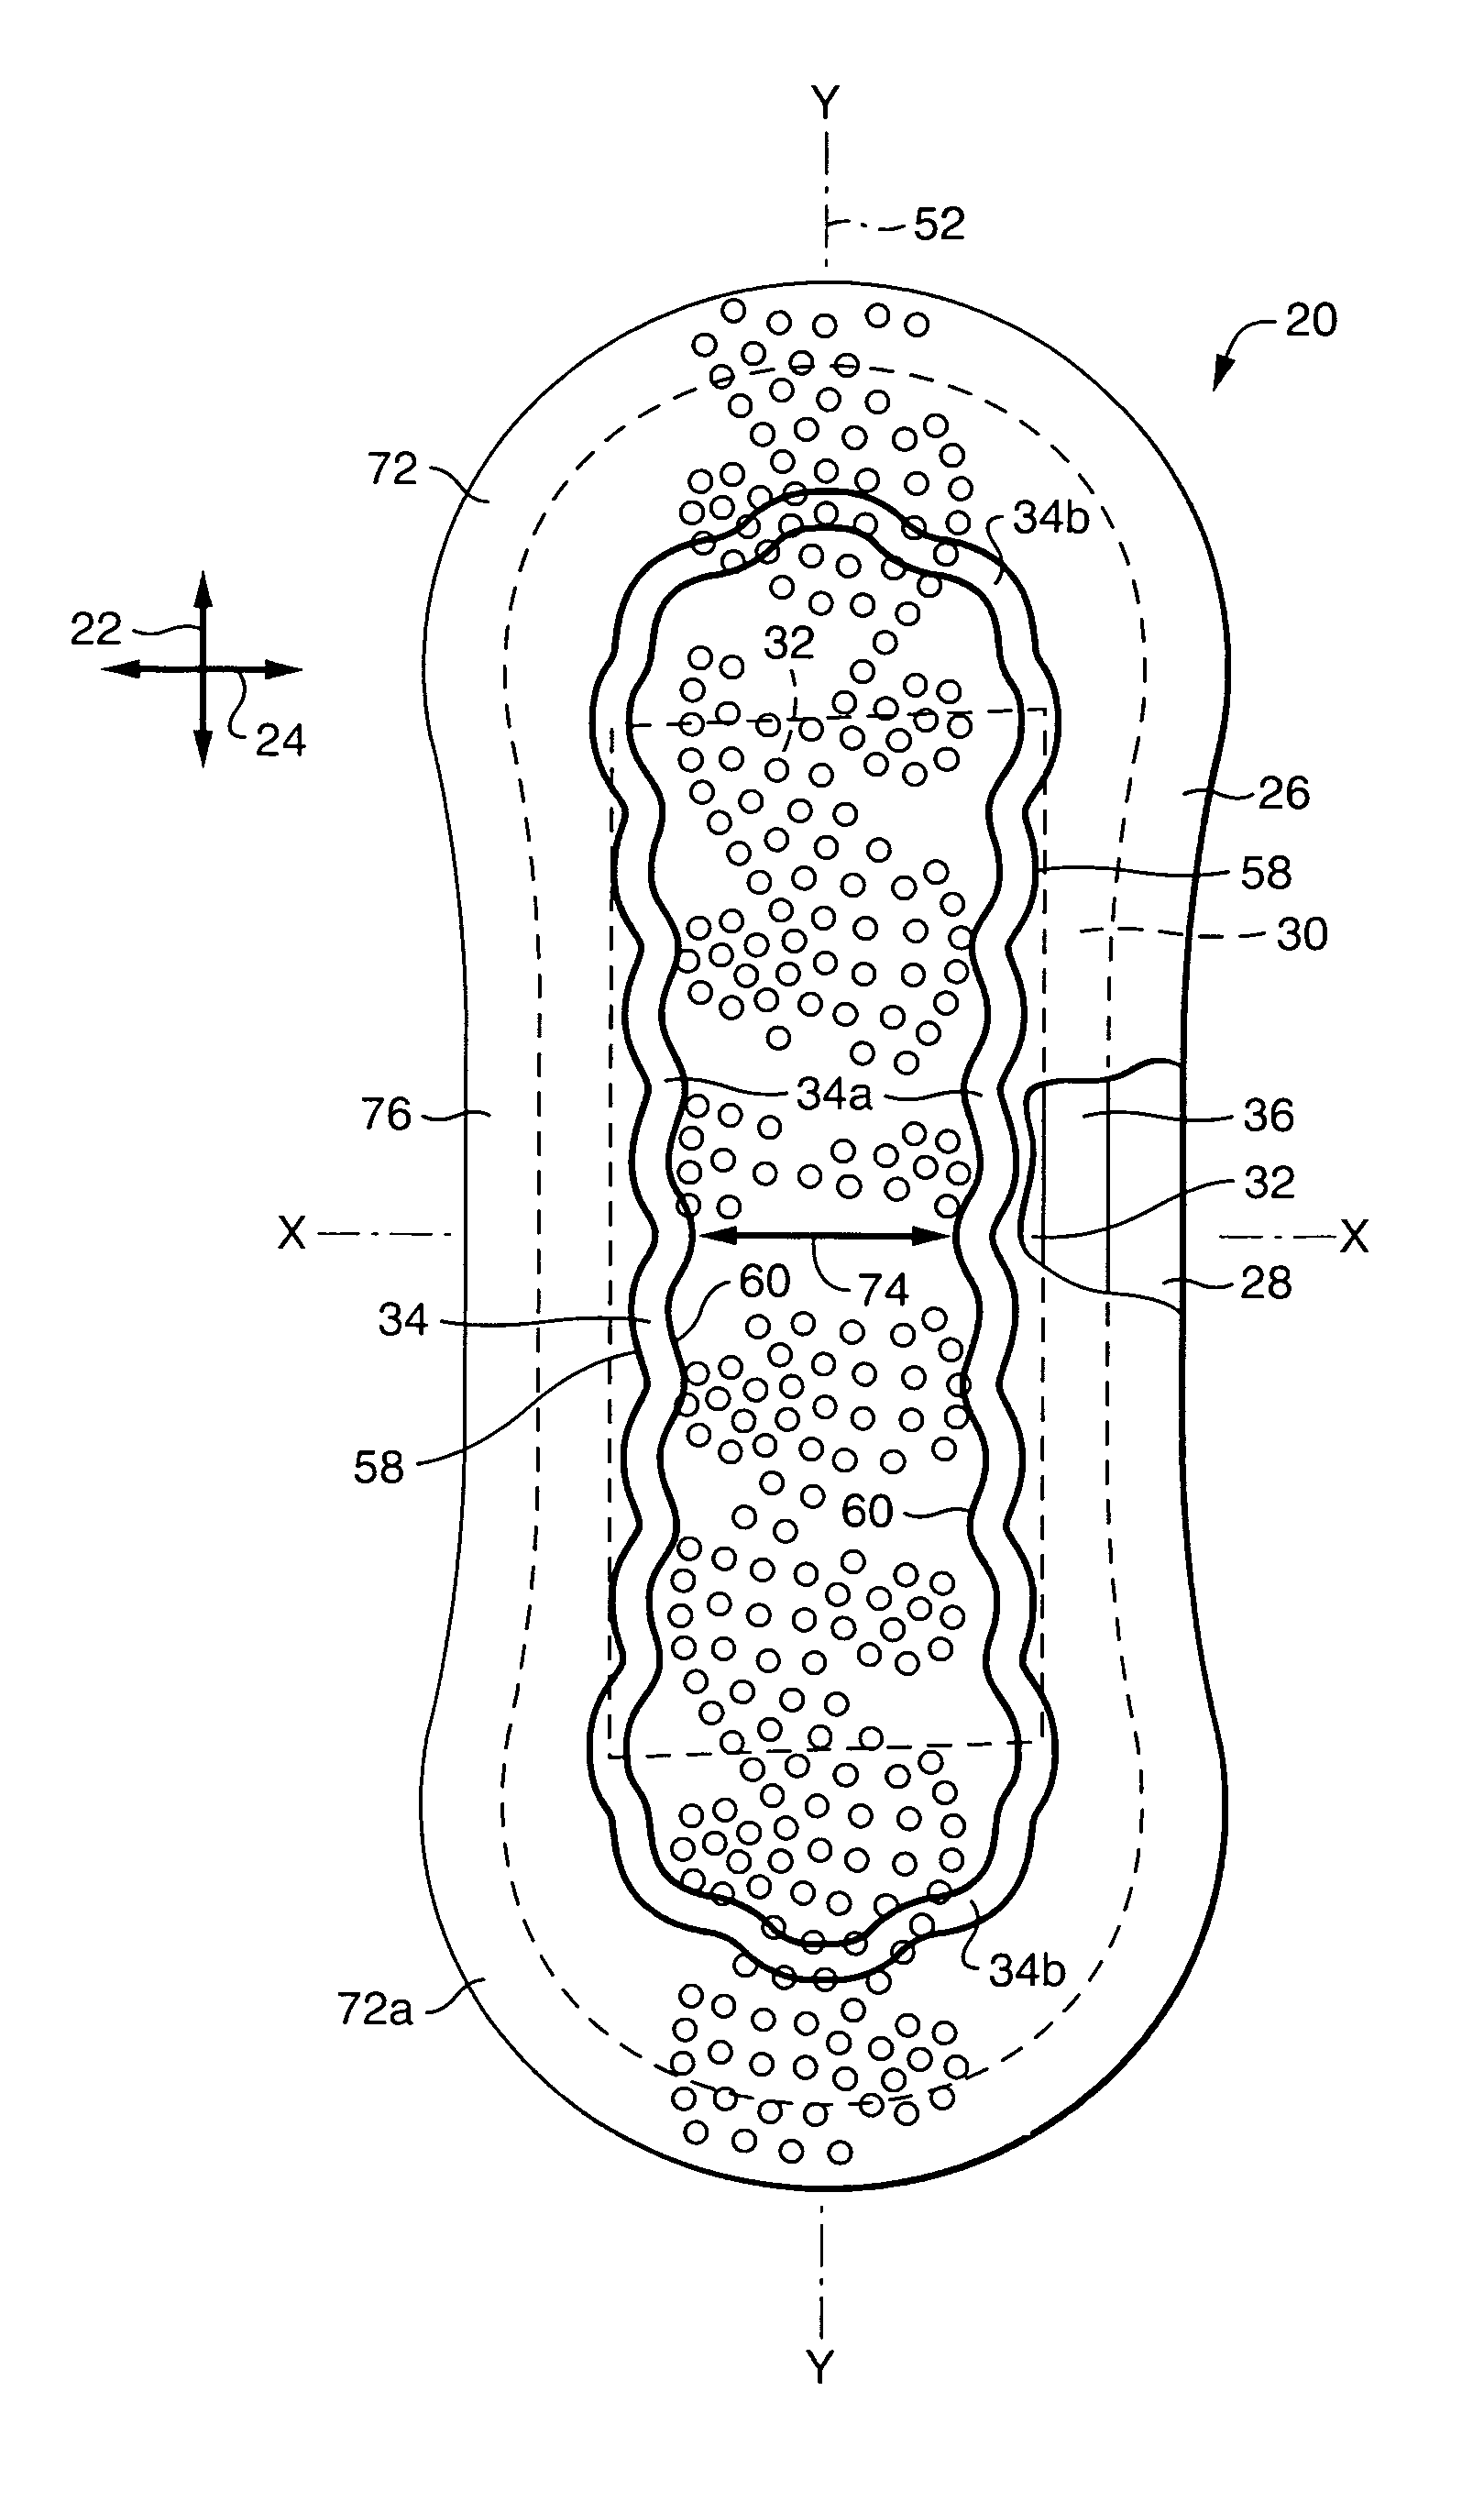 Nonlinear, undulating perimeter embossing in an absorbent article